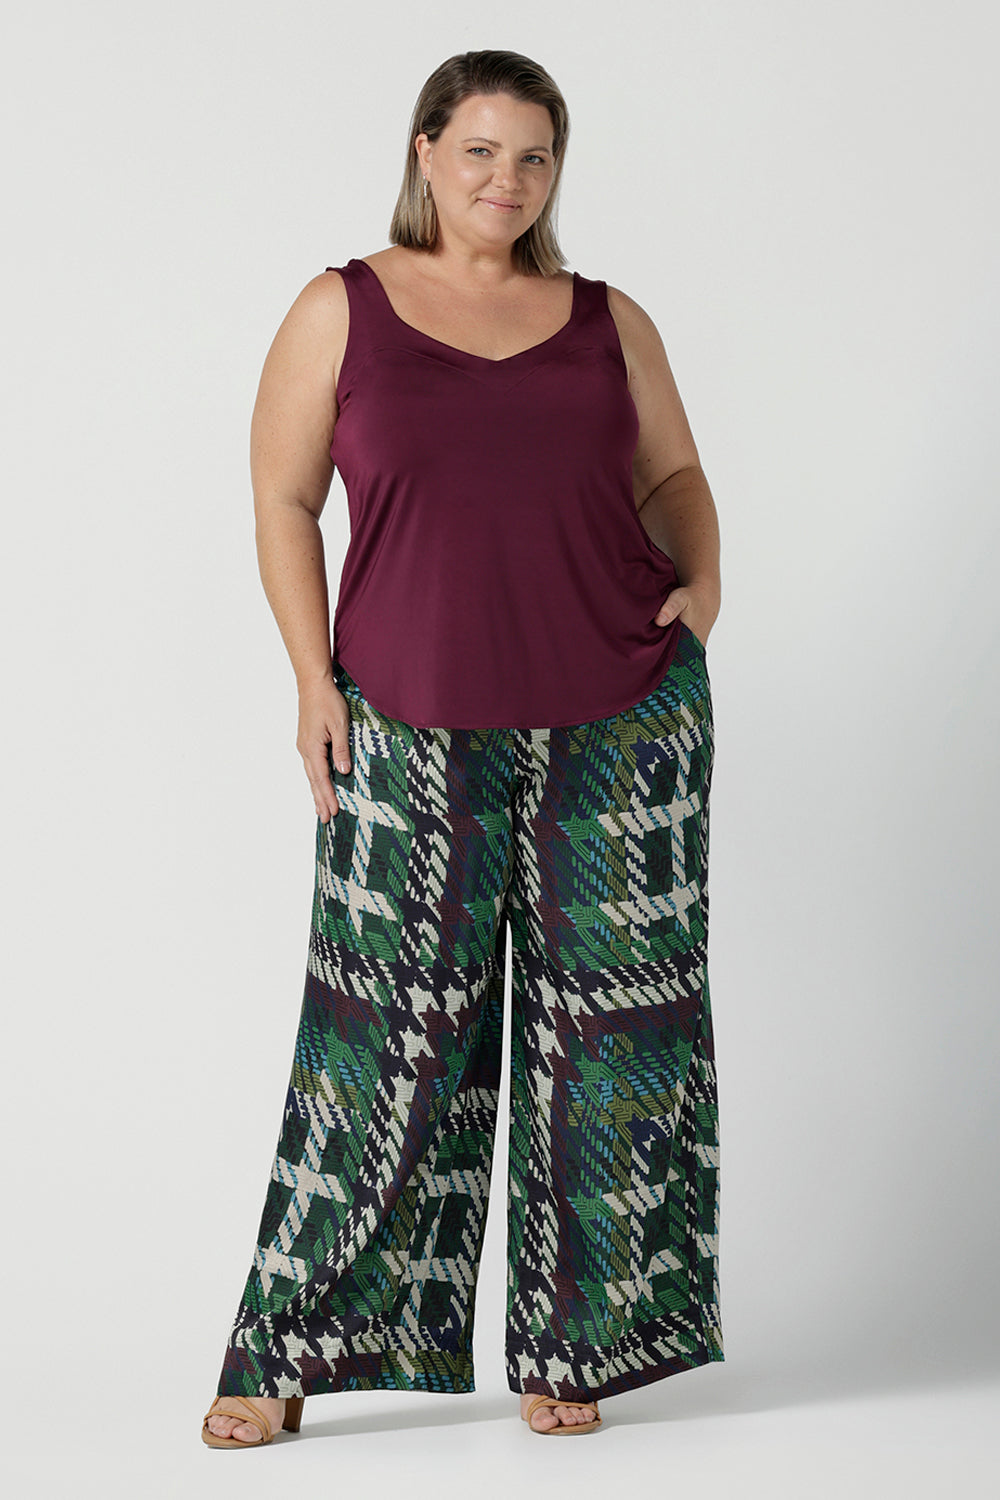 Size 18 woman wears the Eddy Cami top in Plum with wide straps. Made in Australia for women size 8 -24. style back with high waist Lulu pants in Navy. Soft tailored pants.